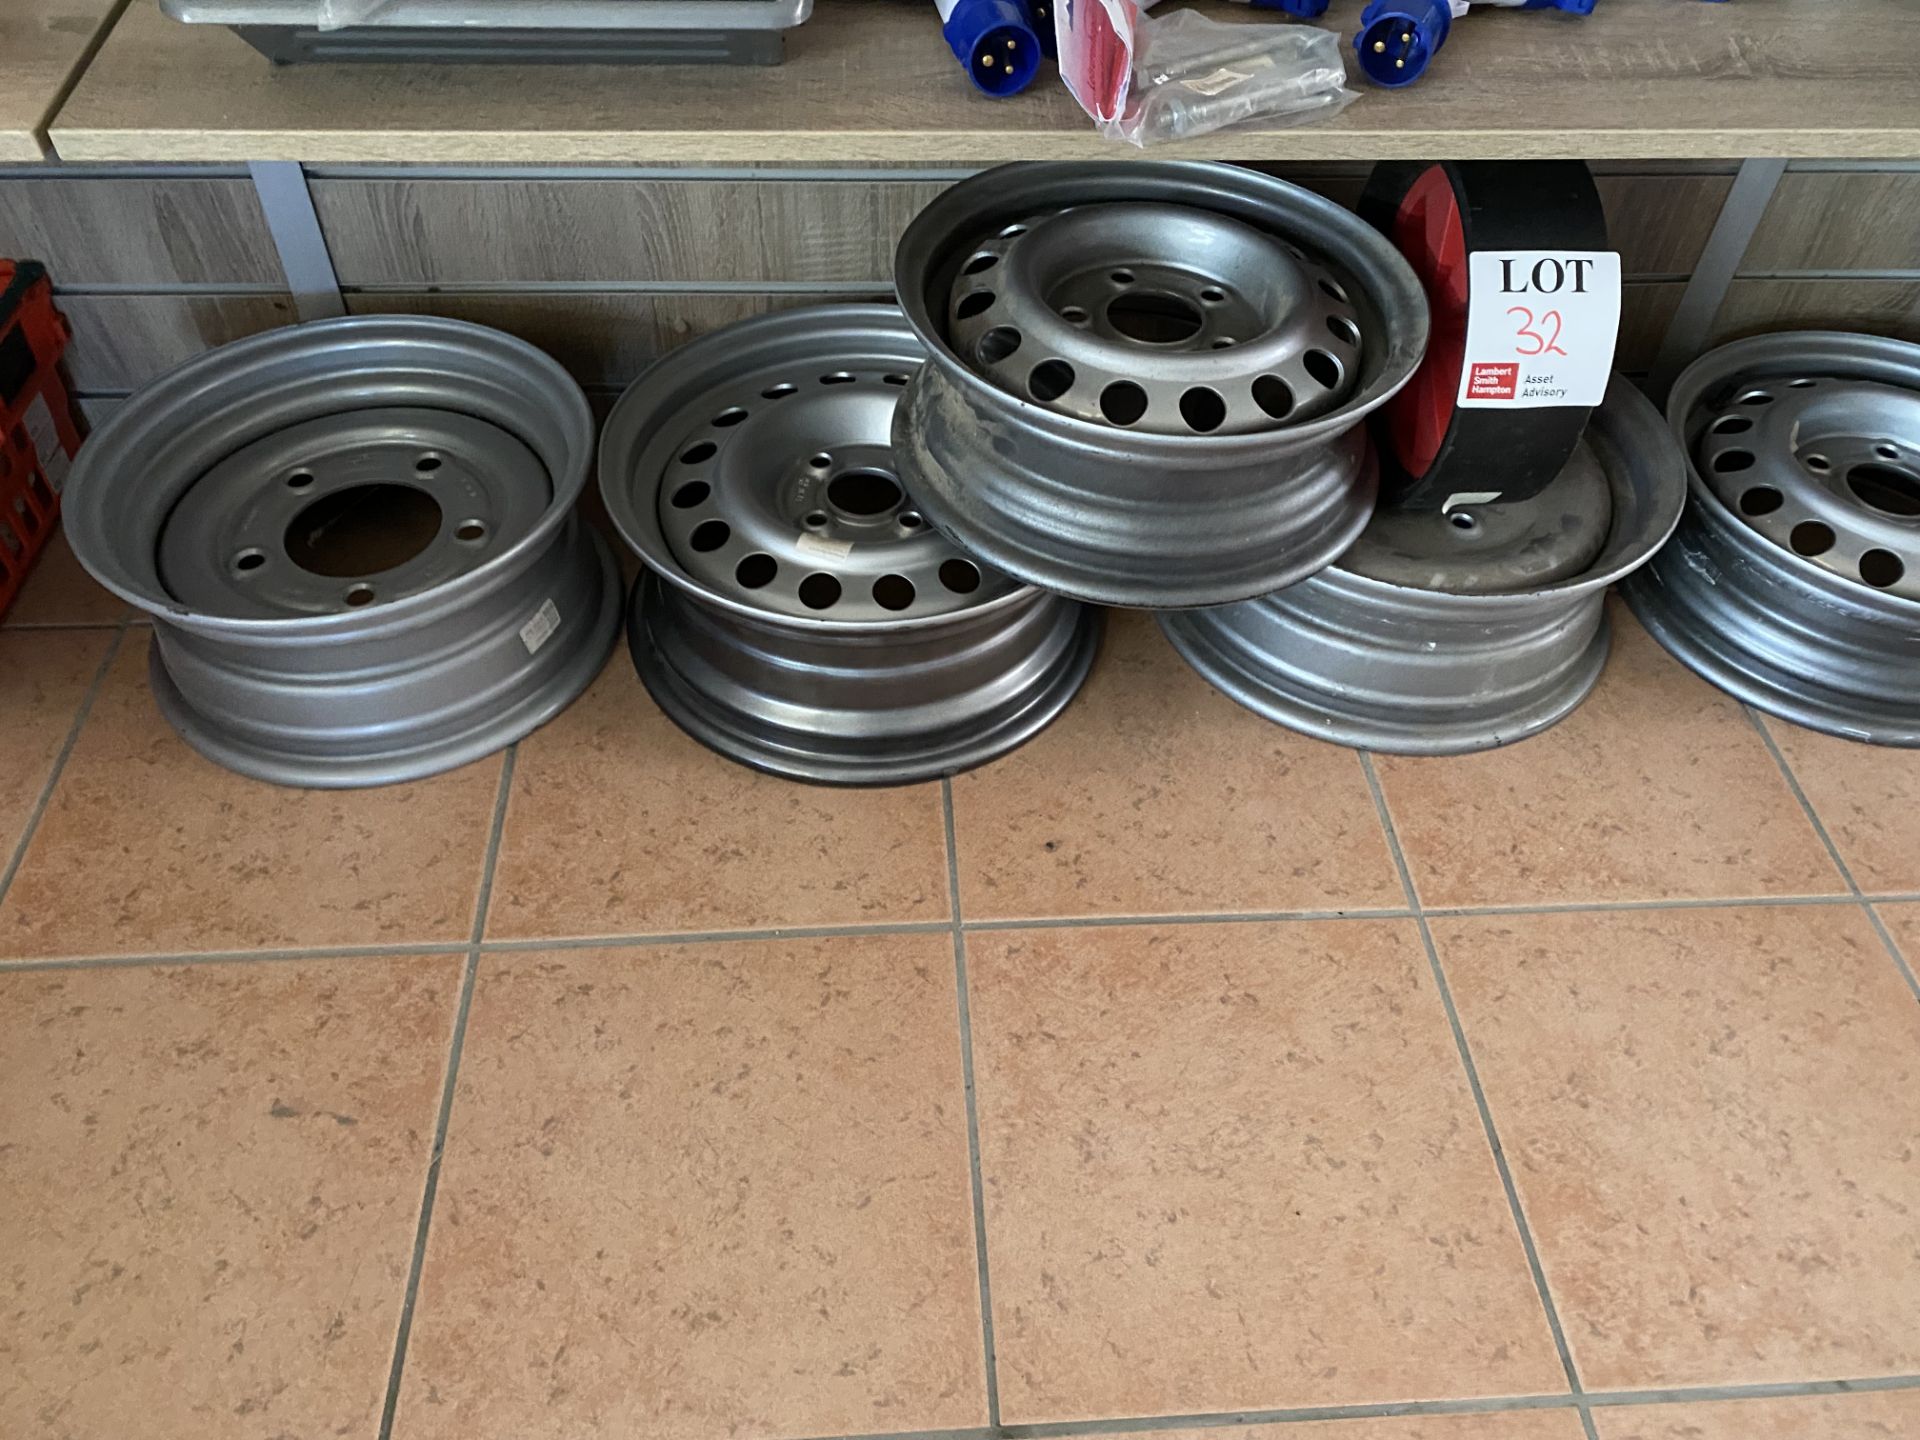 Seven various sized alloys and two plastic wheels